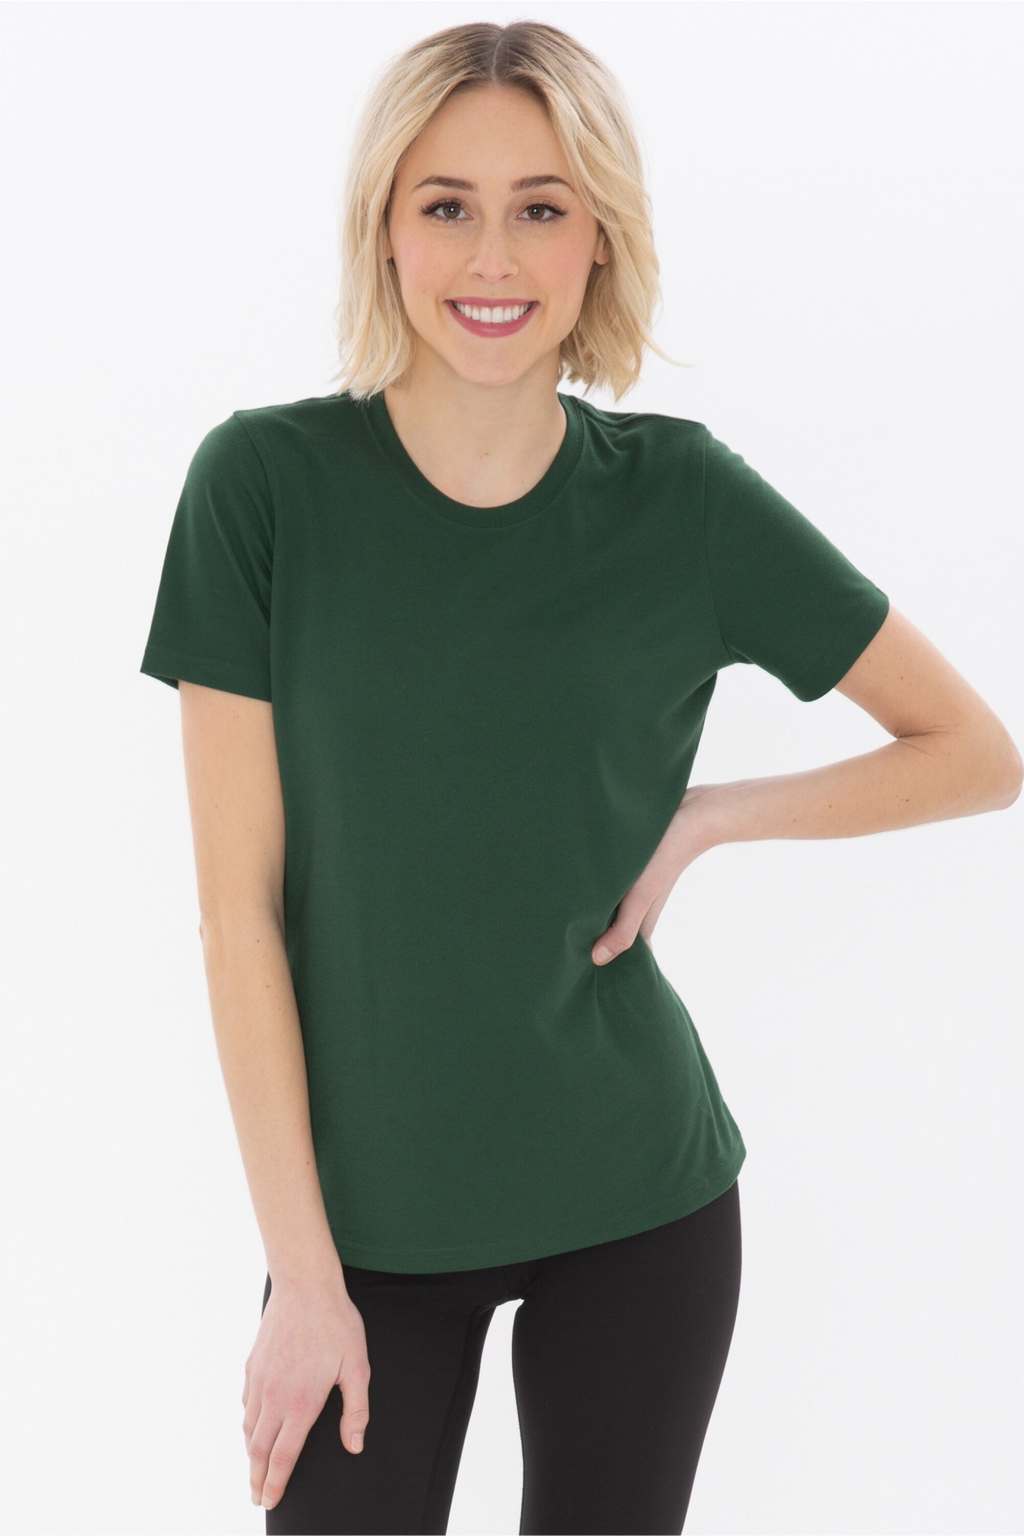 XERSION WOMENS Green- V-NECK T-SHIRT SIZE Small- NWOT